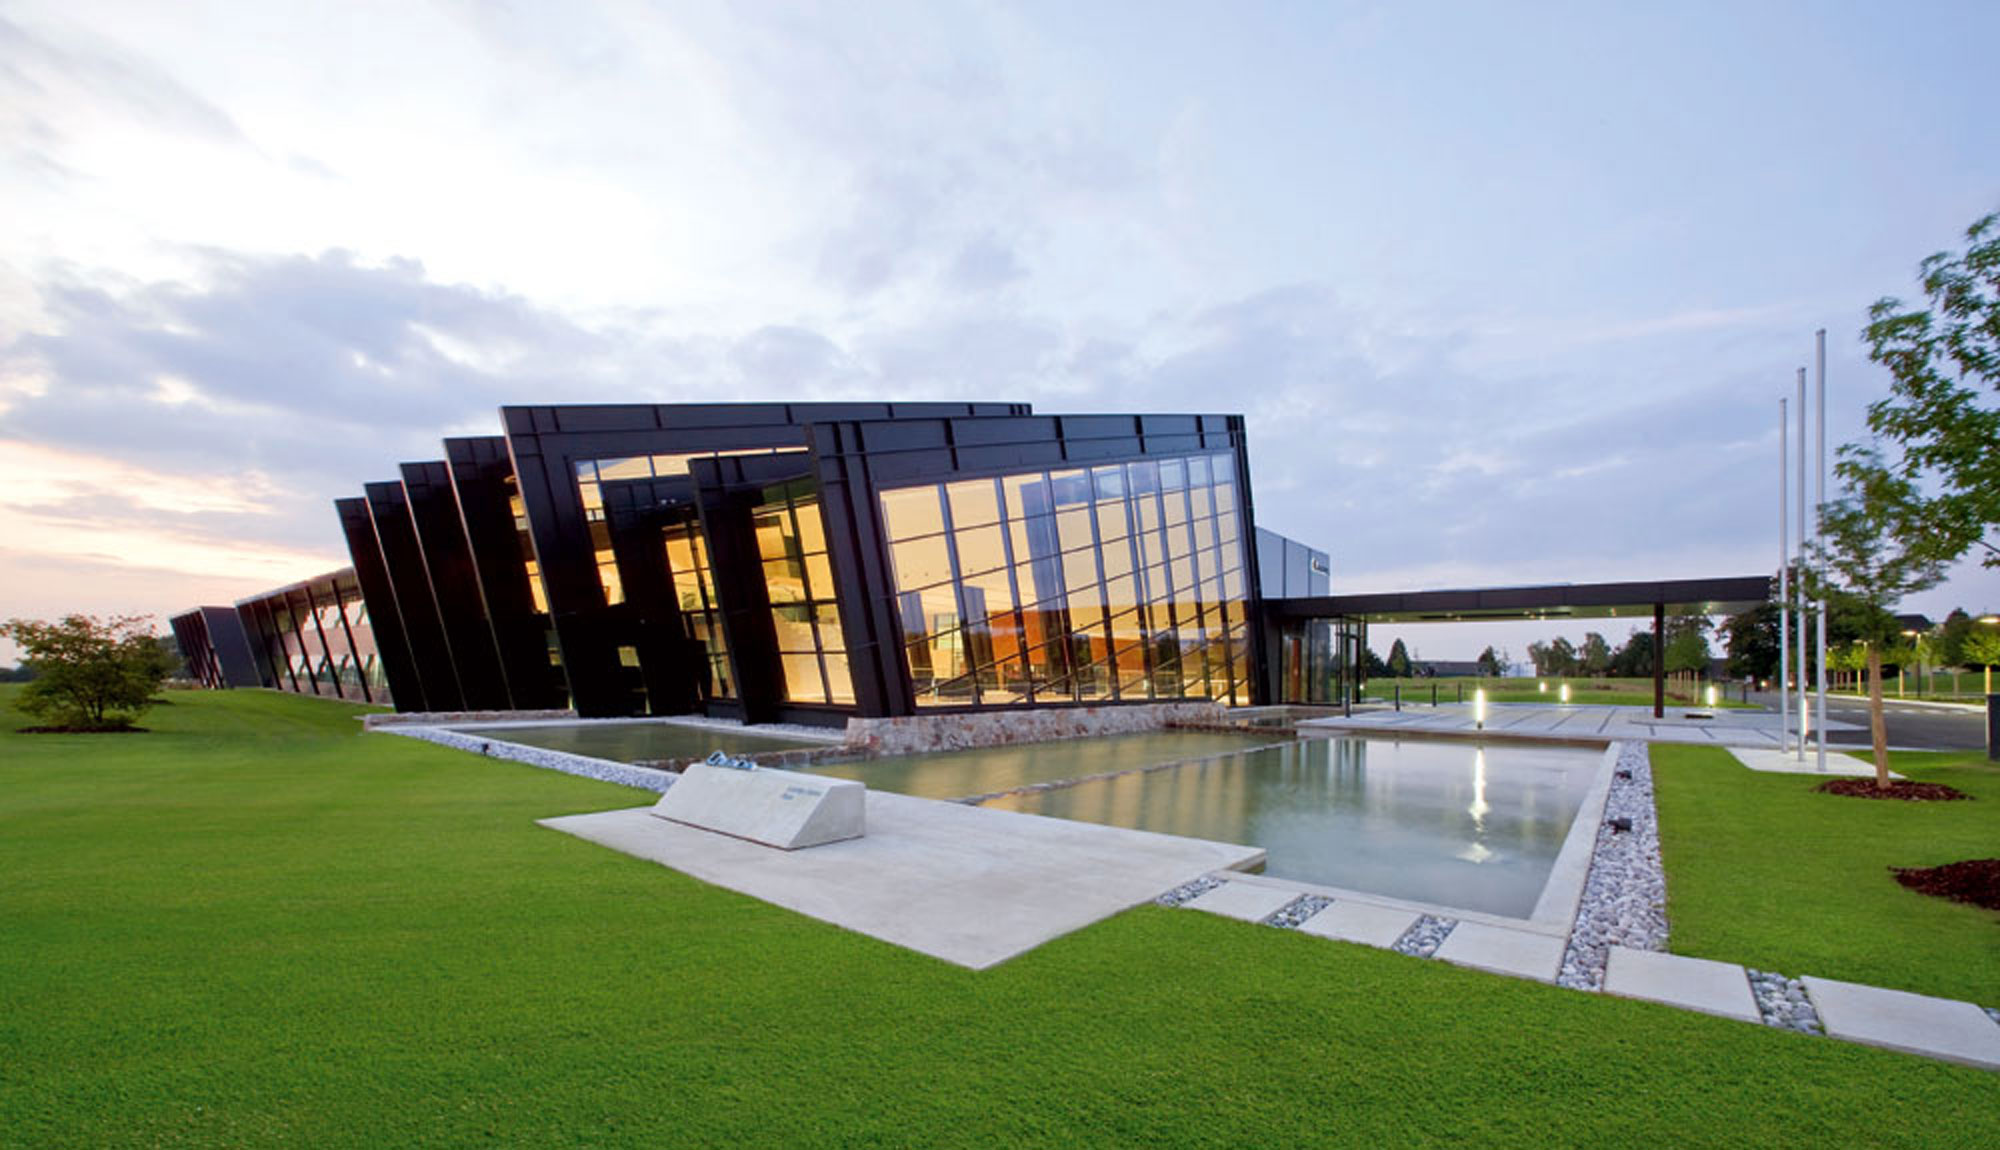 Modern office building complex with large glass façade, surrounded by manicured lawns and a water basin at dusk.